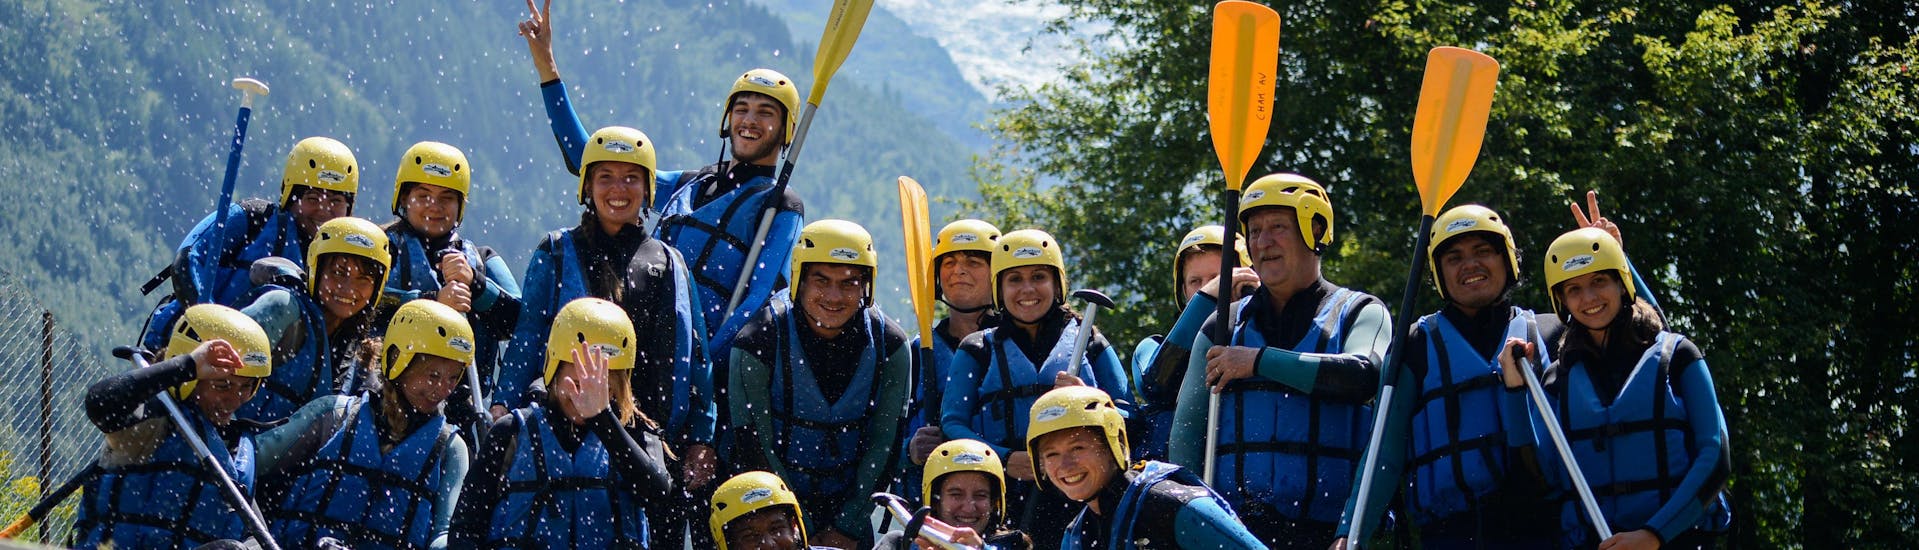 Rafting "Discovery" - Arve.